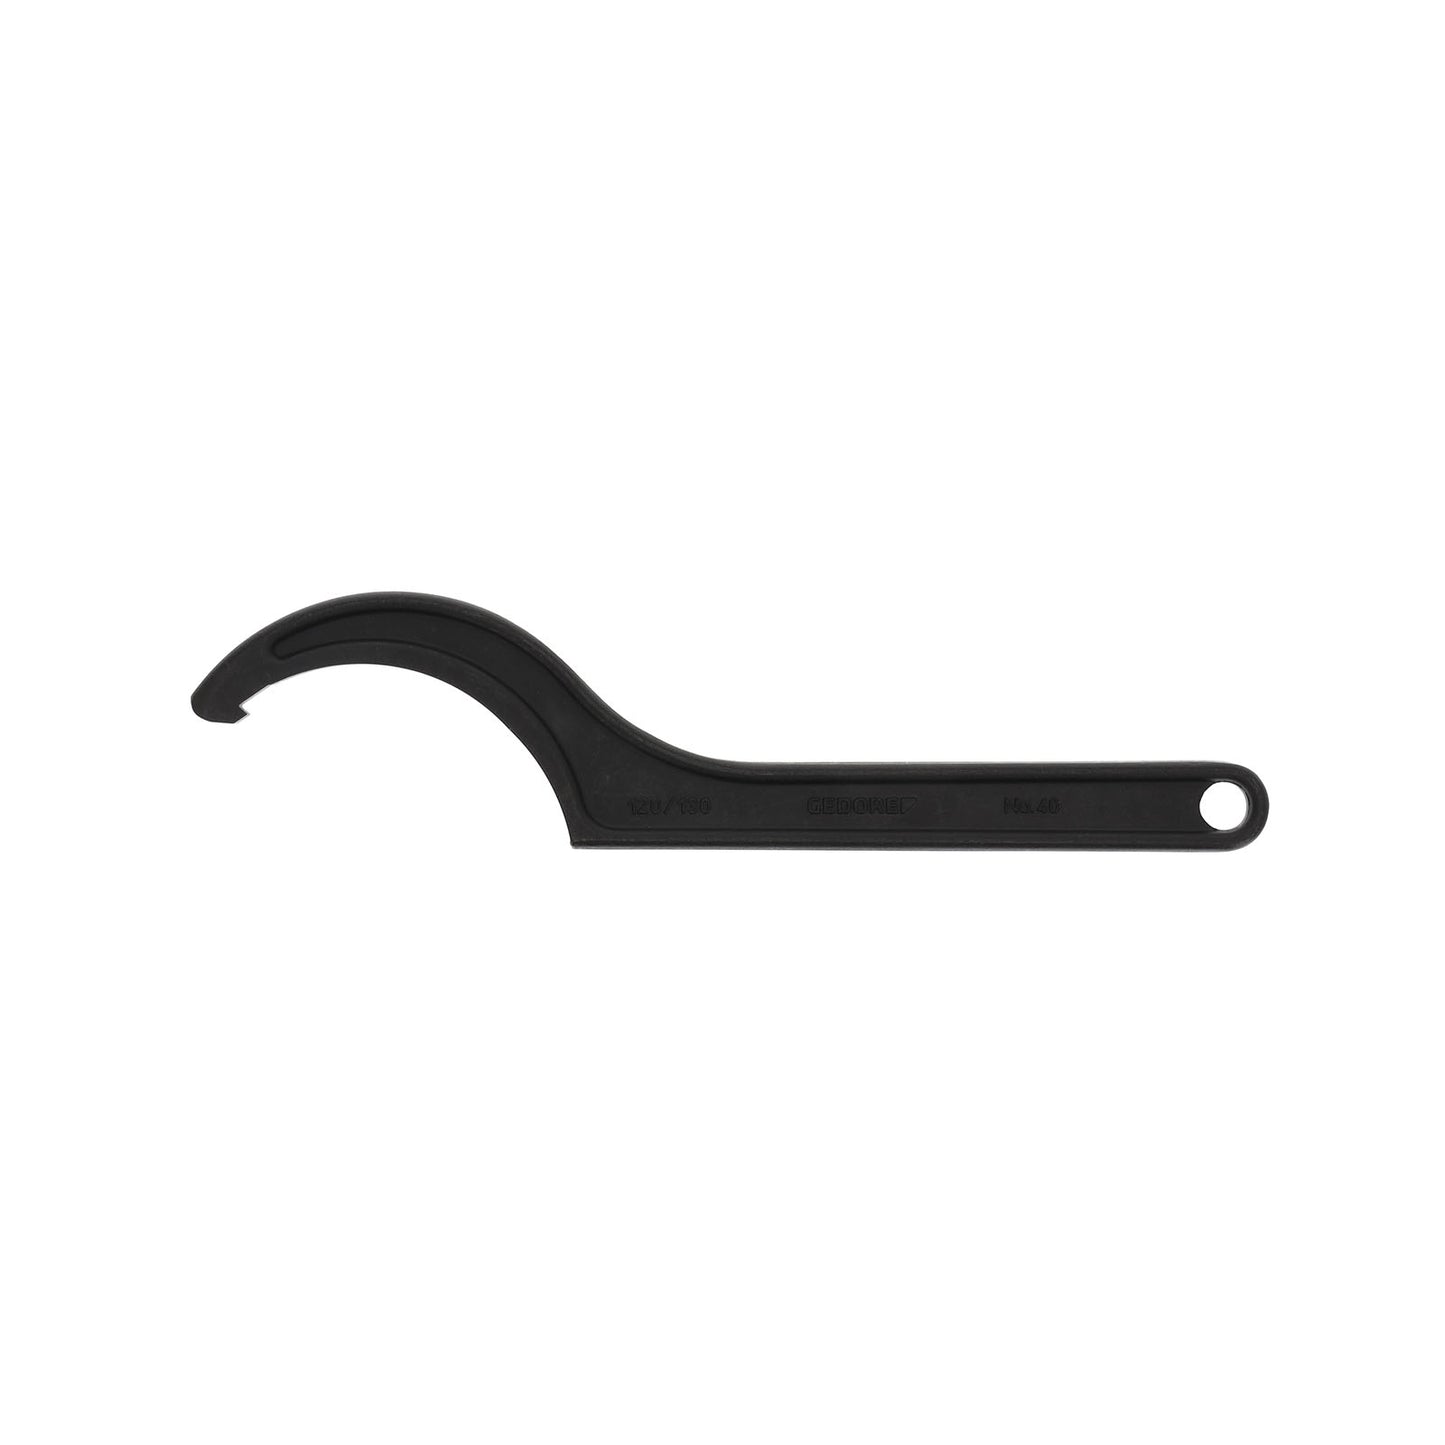 GEDORE 40 120-130 - Hook Wrench, 120-130 (6335340)